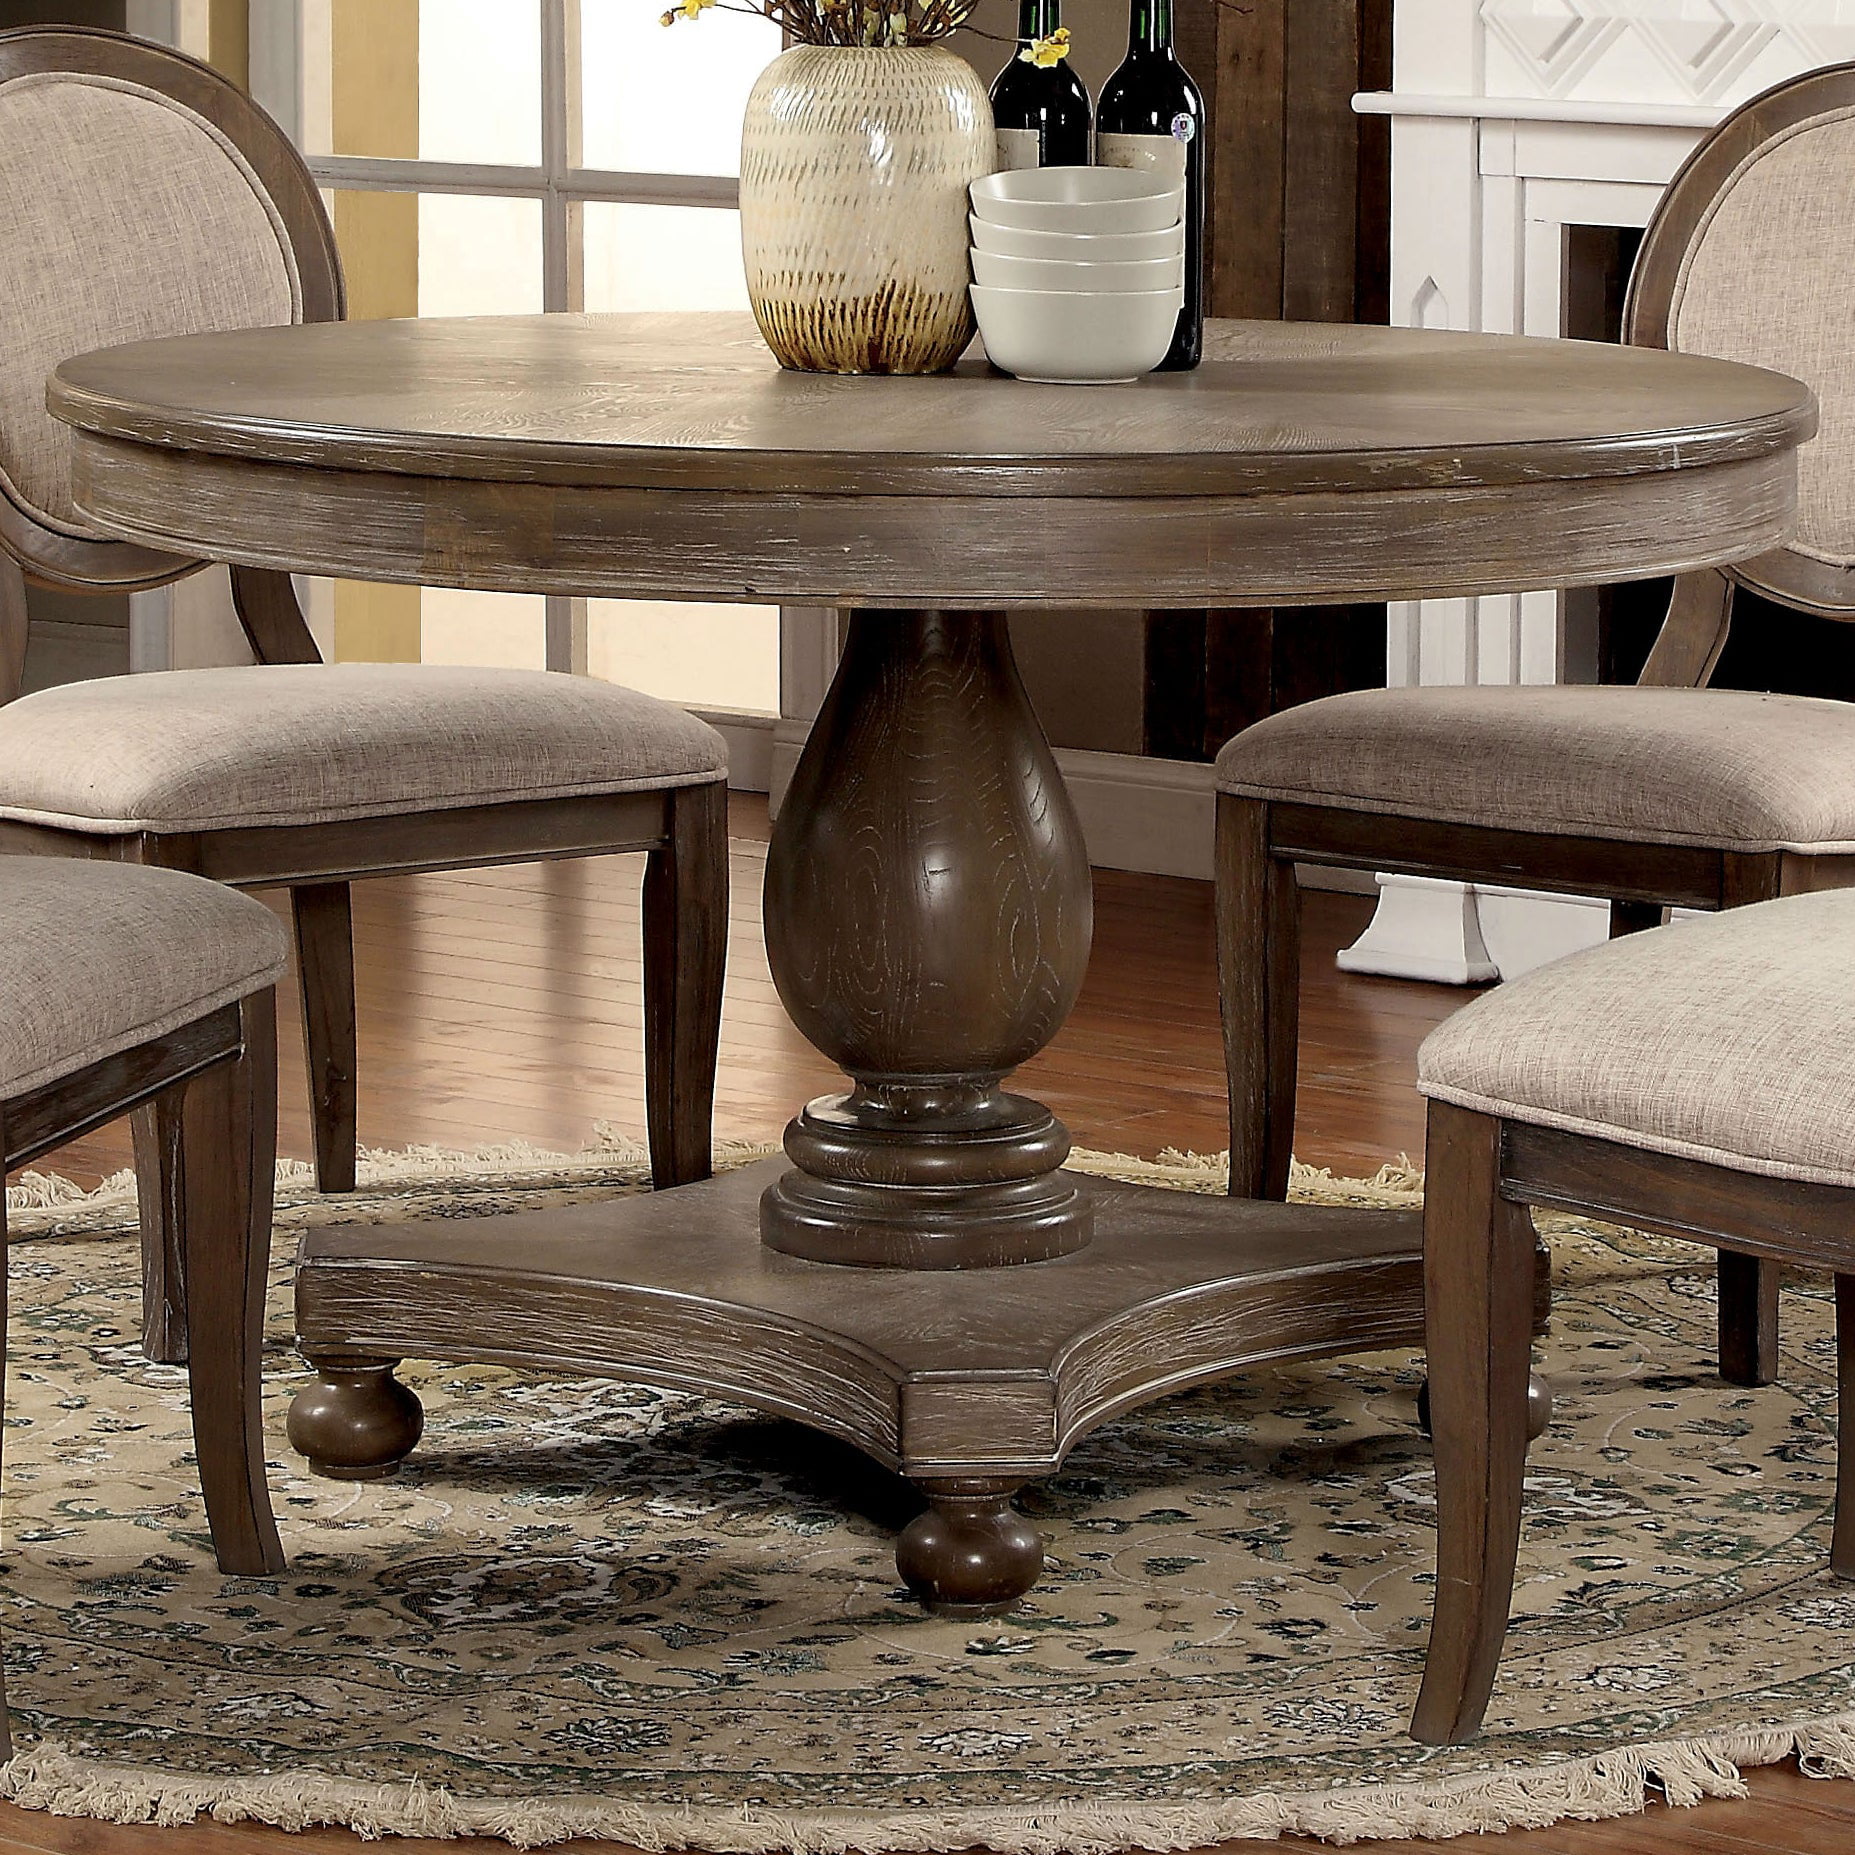 The Gray Barn Louland Falls Rustic 48, 48 Inch Round Pedestal Table With Leaf